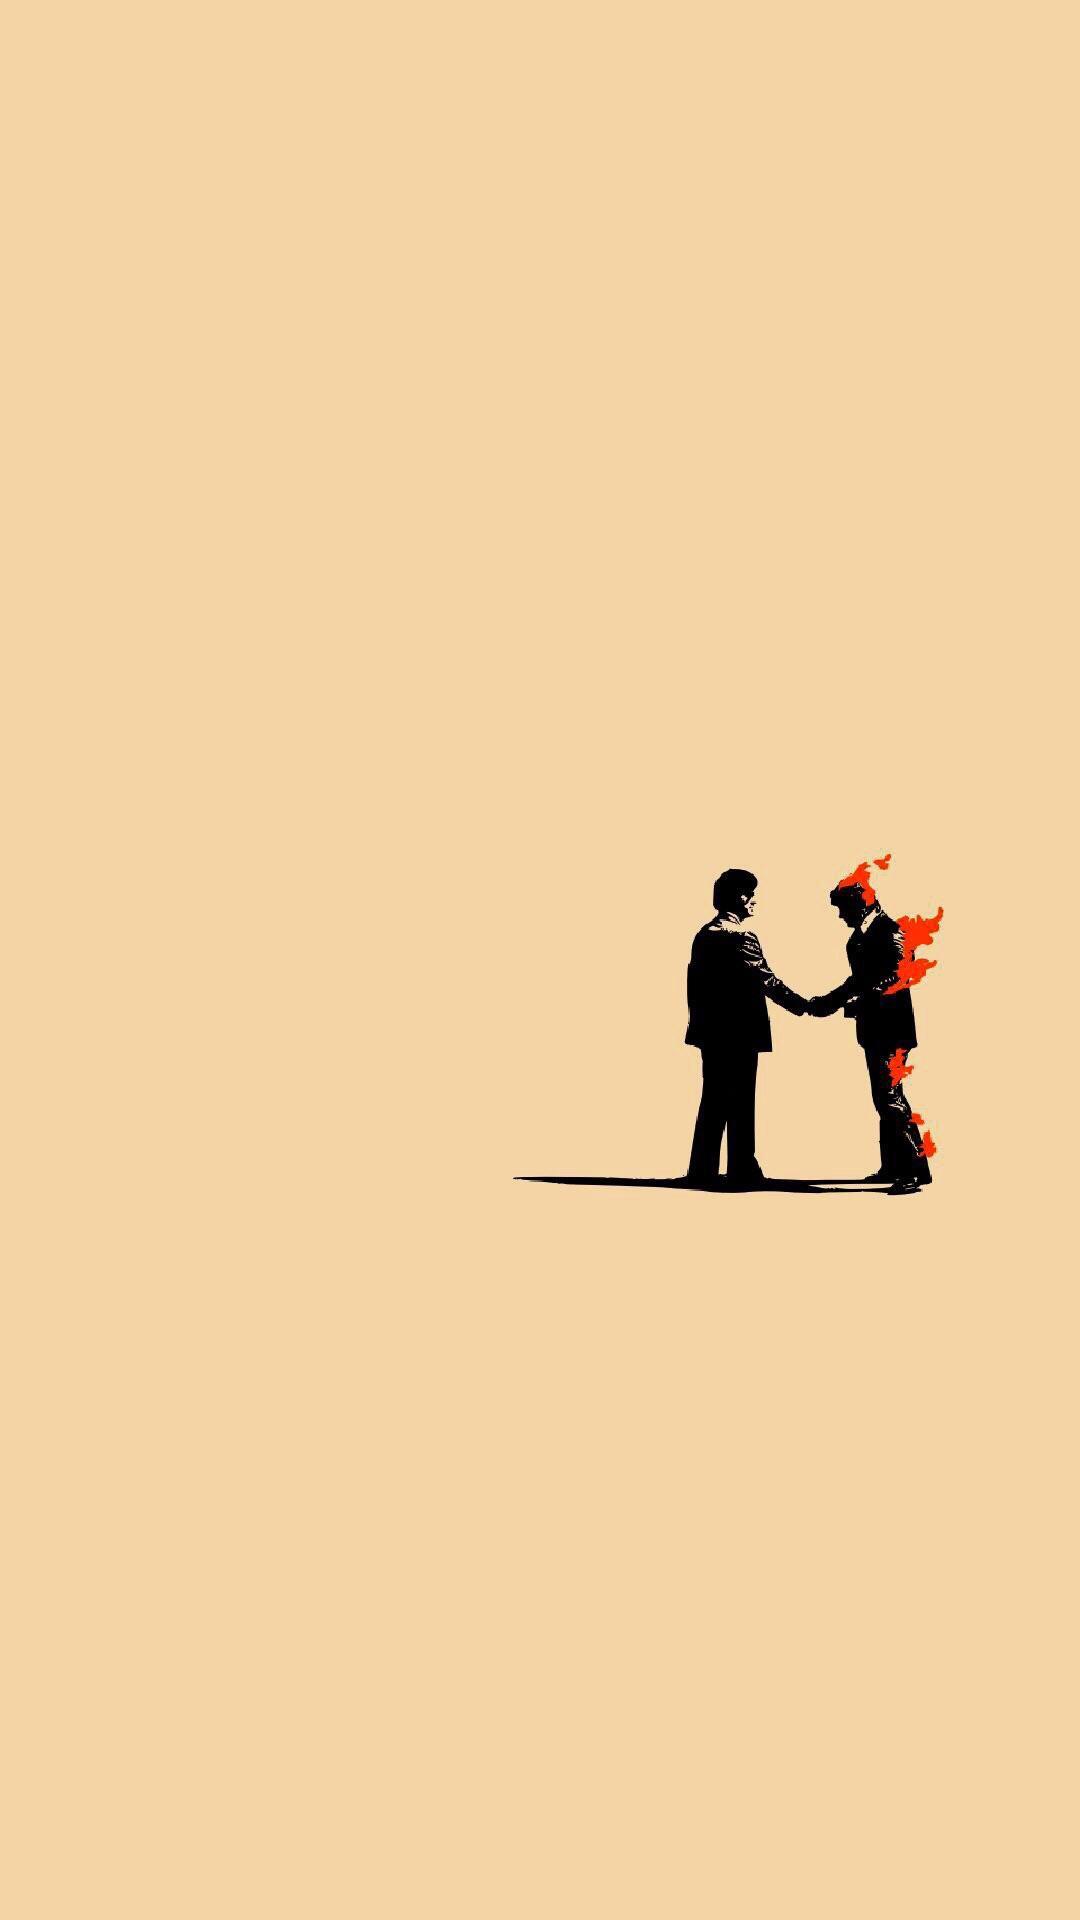 This Wish You Were Here Pink Floyd wallpaper